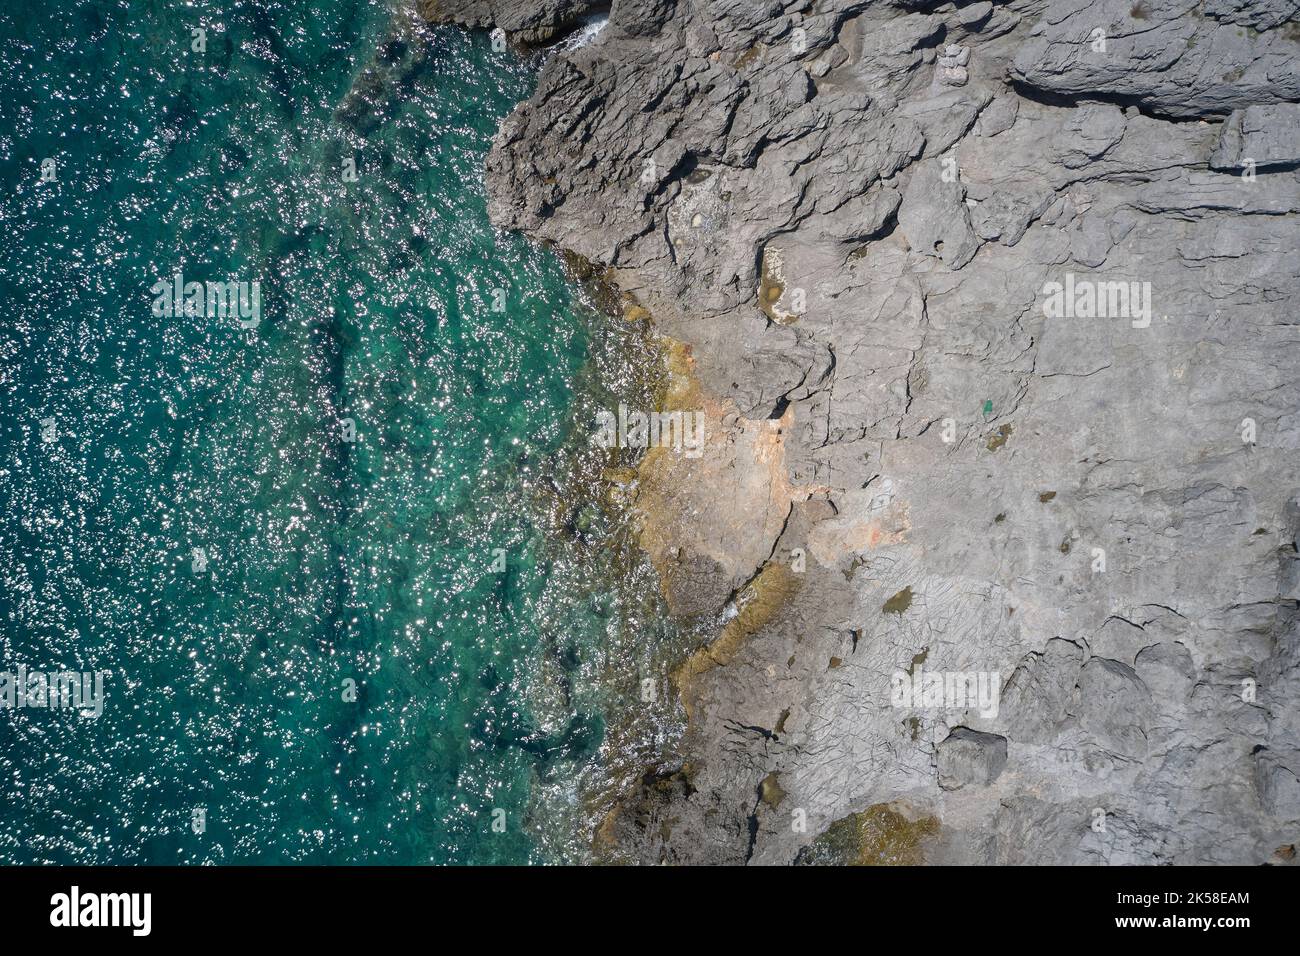 Aerial view of rocky beach in the Adriatic Sea, in Montenegro. Stock Photo